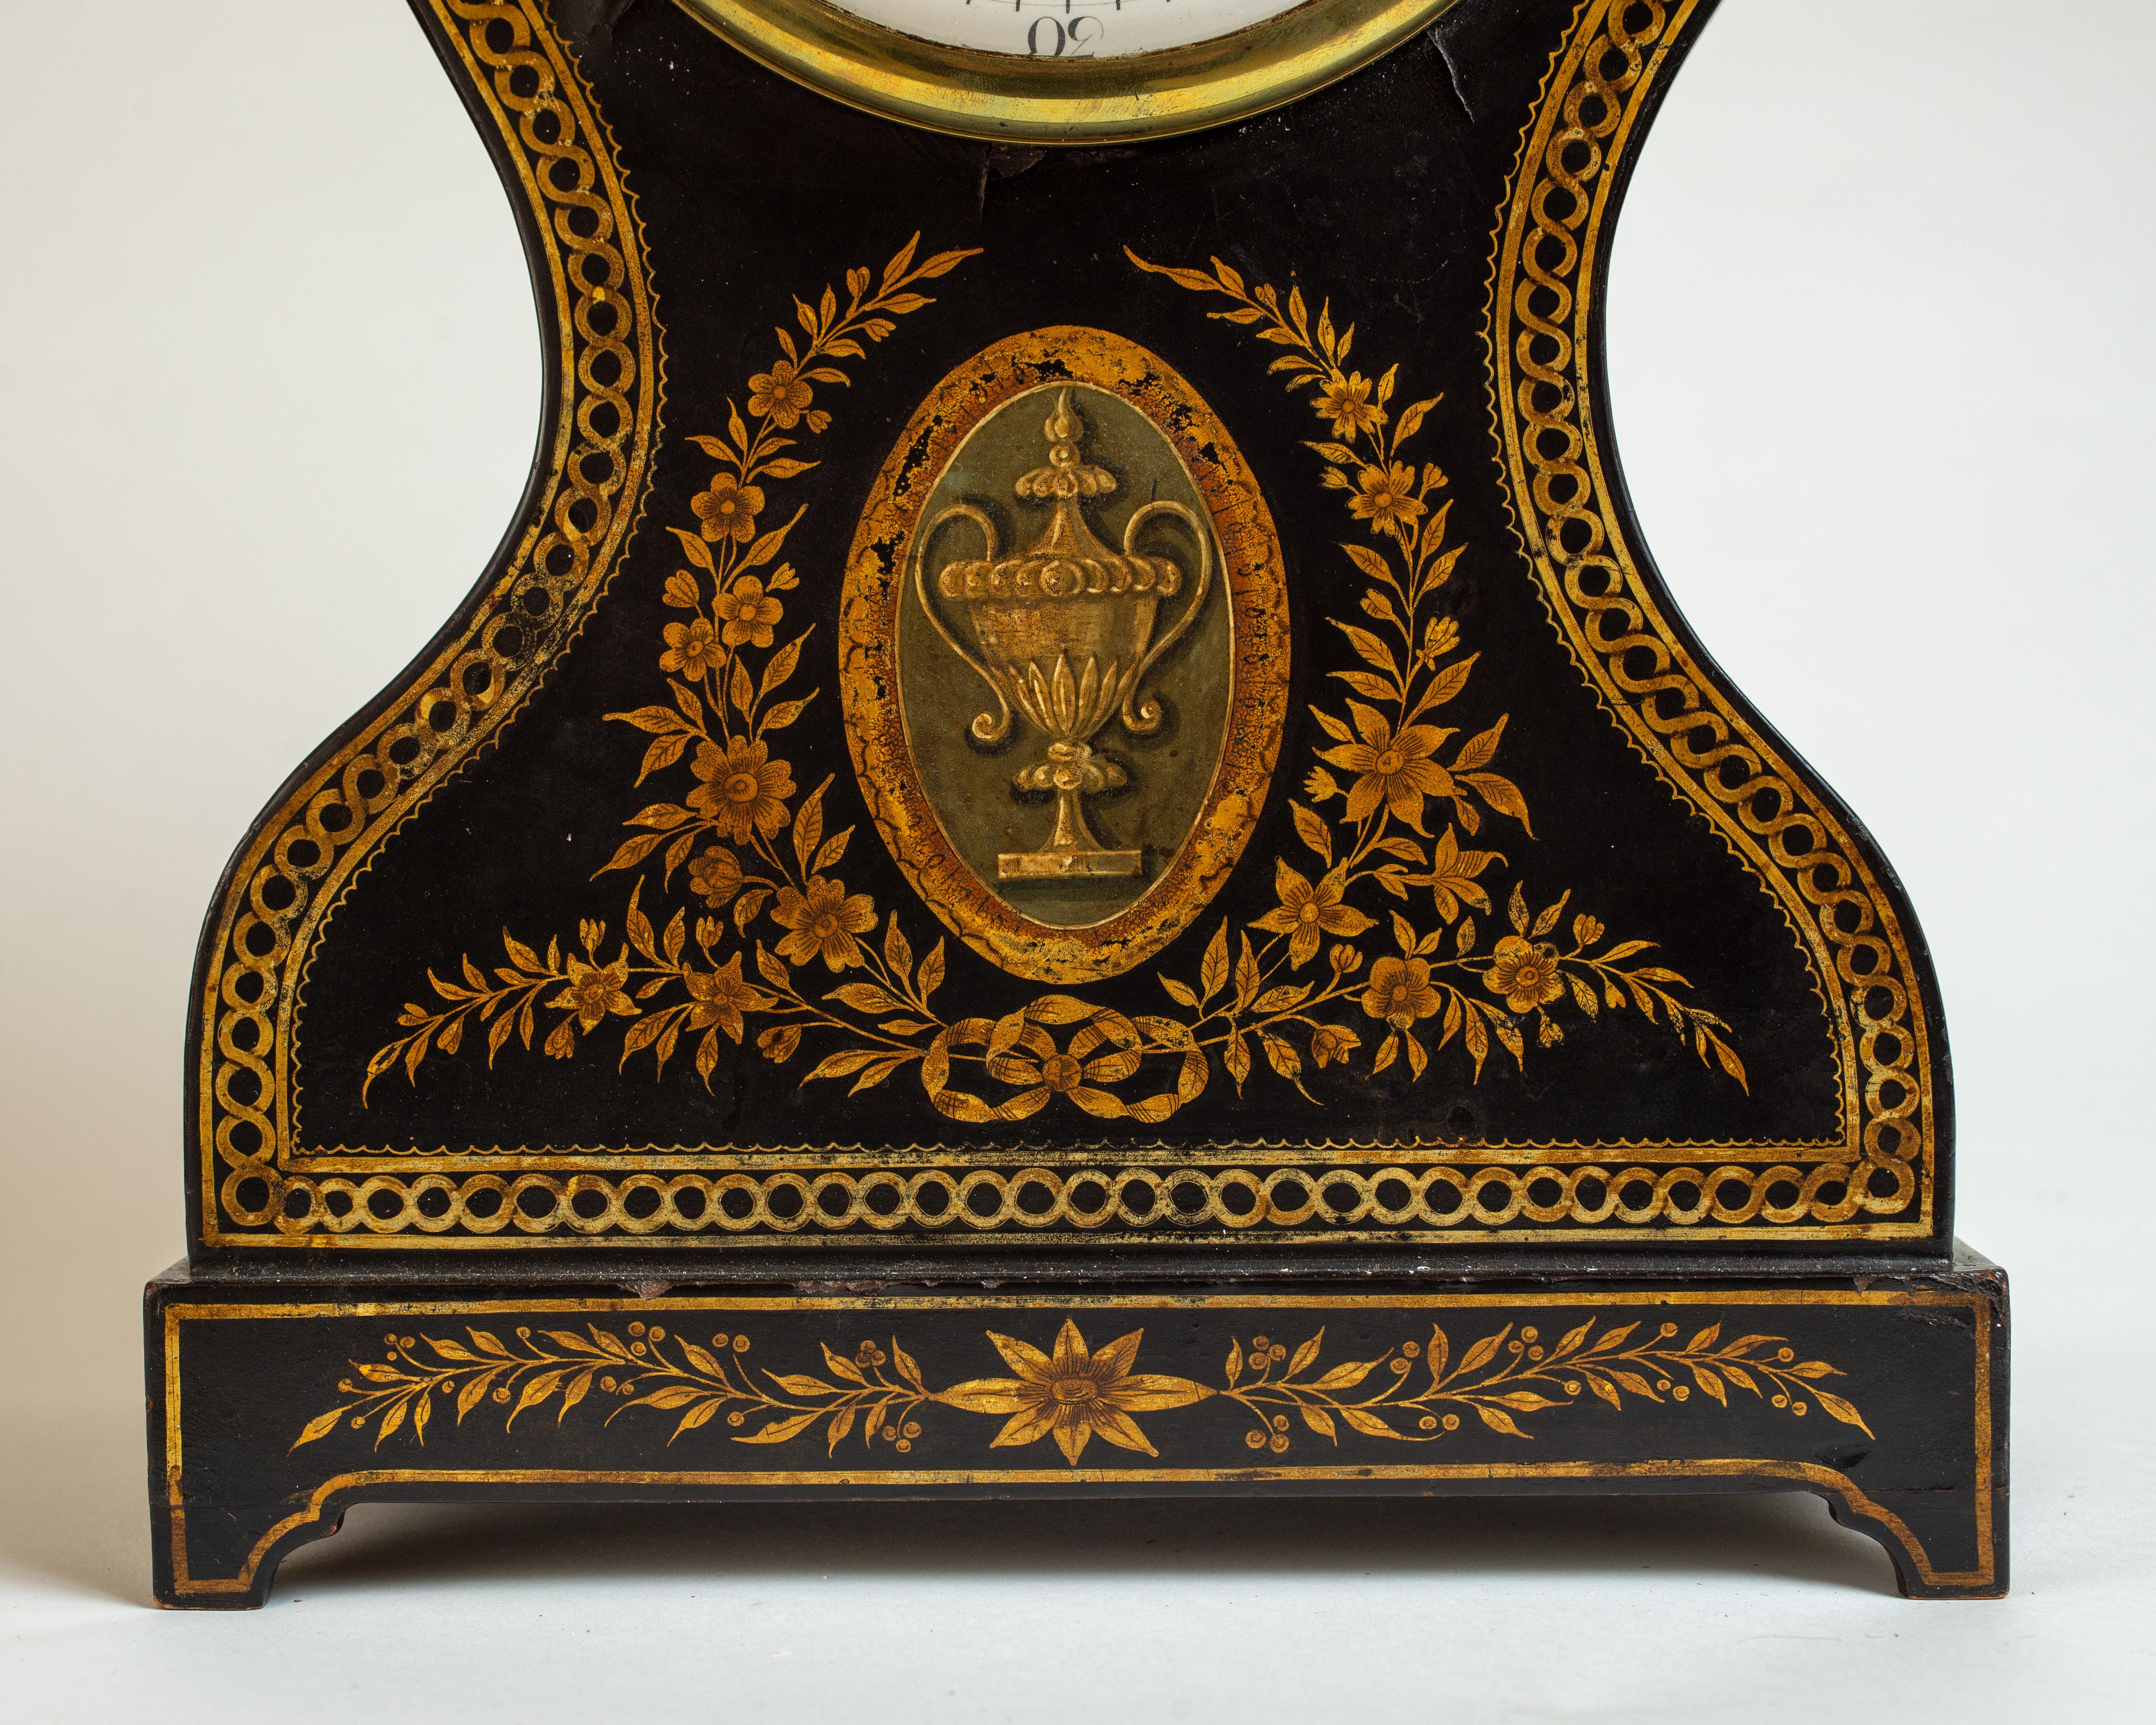 The waisted sides surmounted by a brass urn finial, above a rectangular base raised on bracket feet, decorated with braided border and depictions of floral swags, garland, and hunt trophies, the porcelain dial with Roman numerals and Arabic numerals